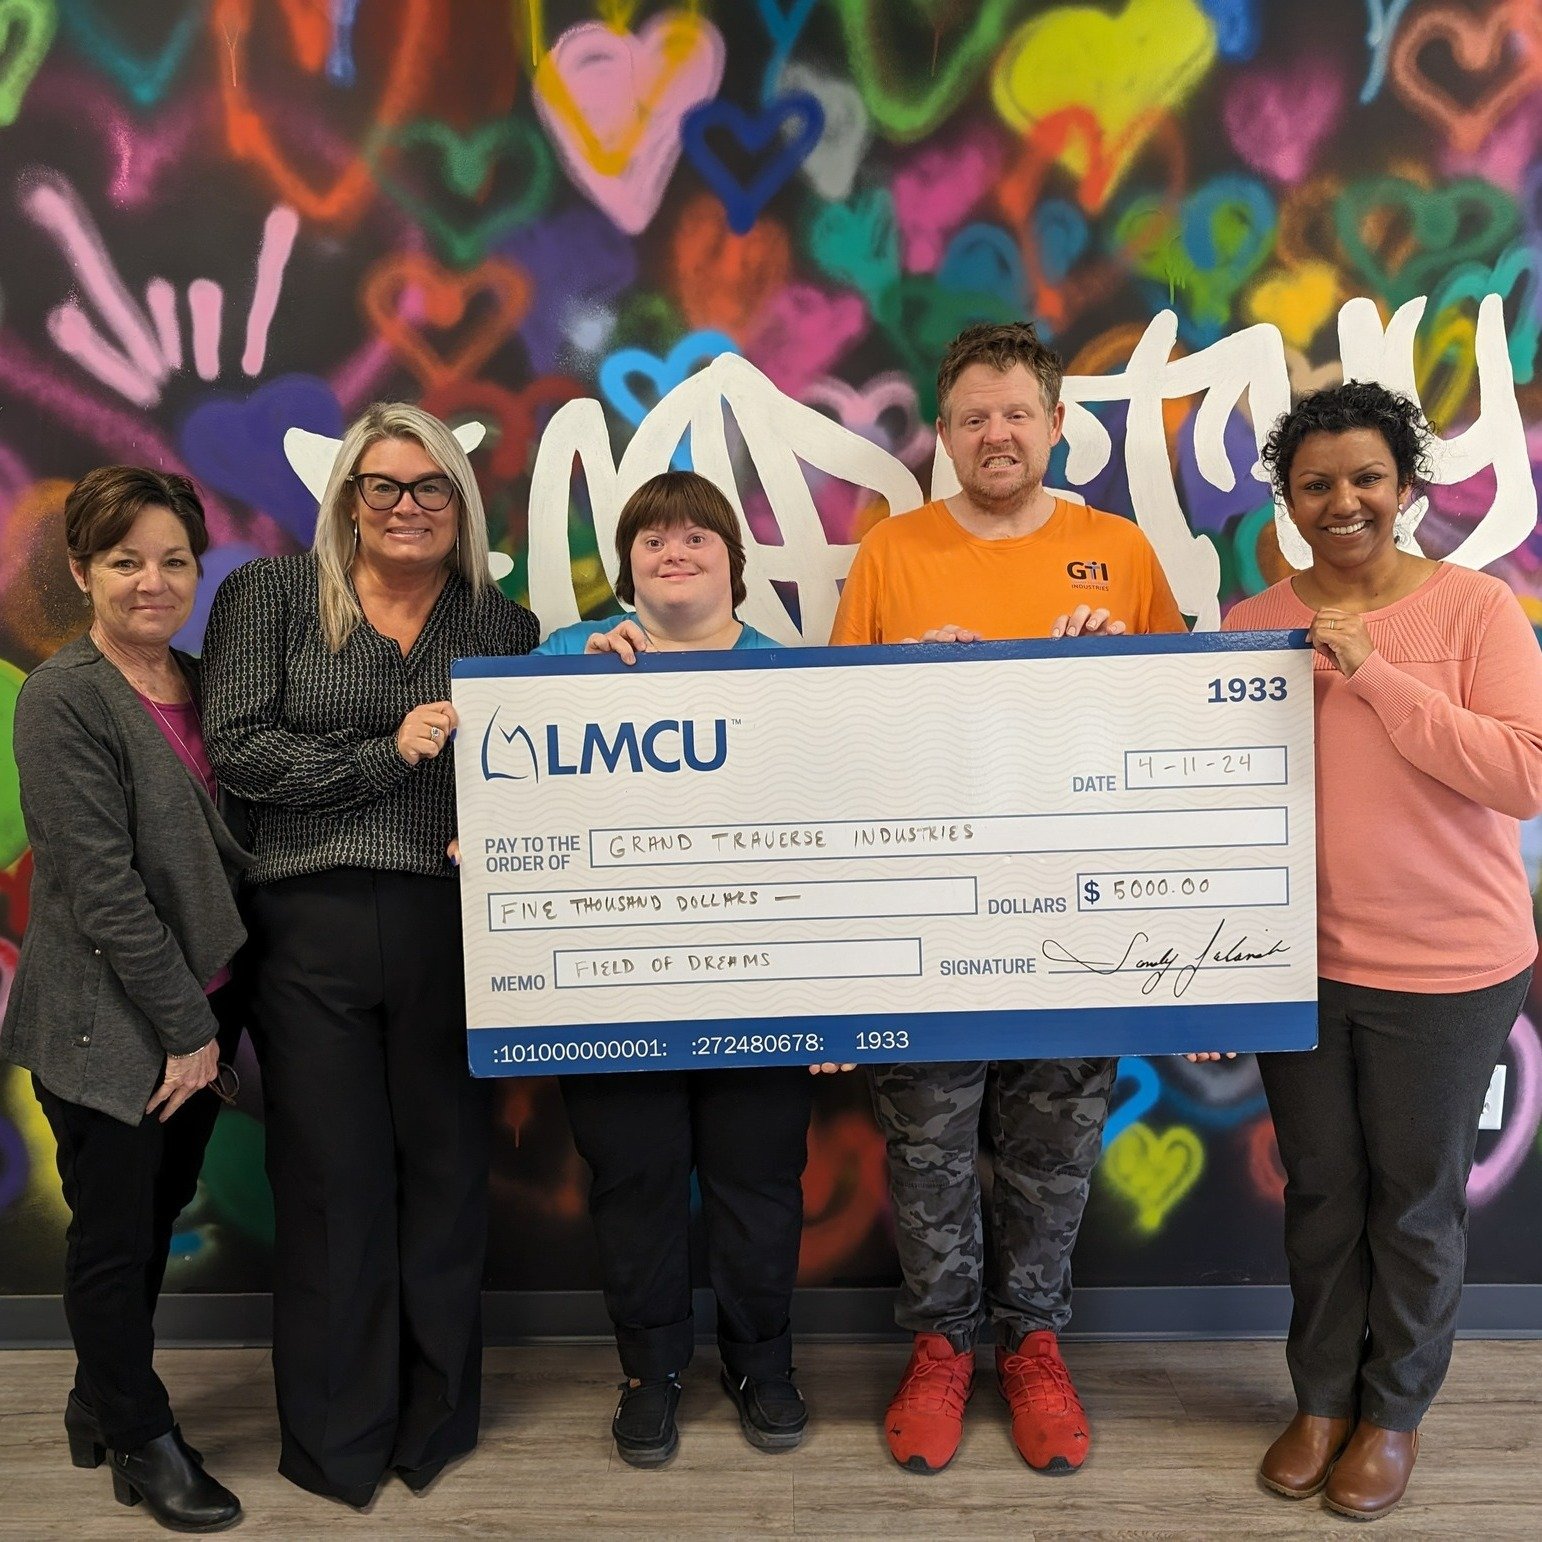 A huge thank you to LMCU for their generous donation towards our Field of Dreams outdoor recreation area! LMCU's continued volunteering and support of our team members means so much!